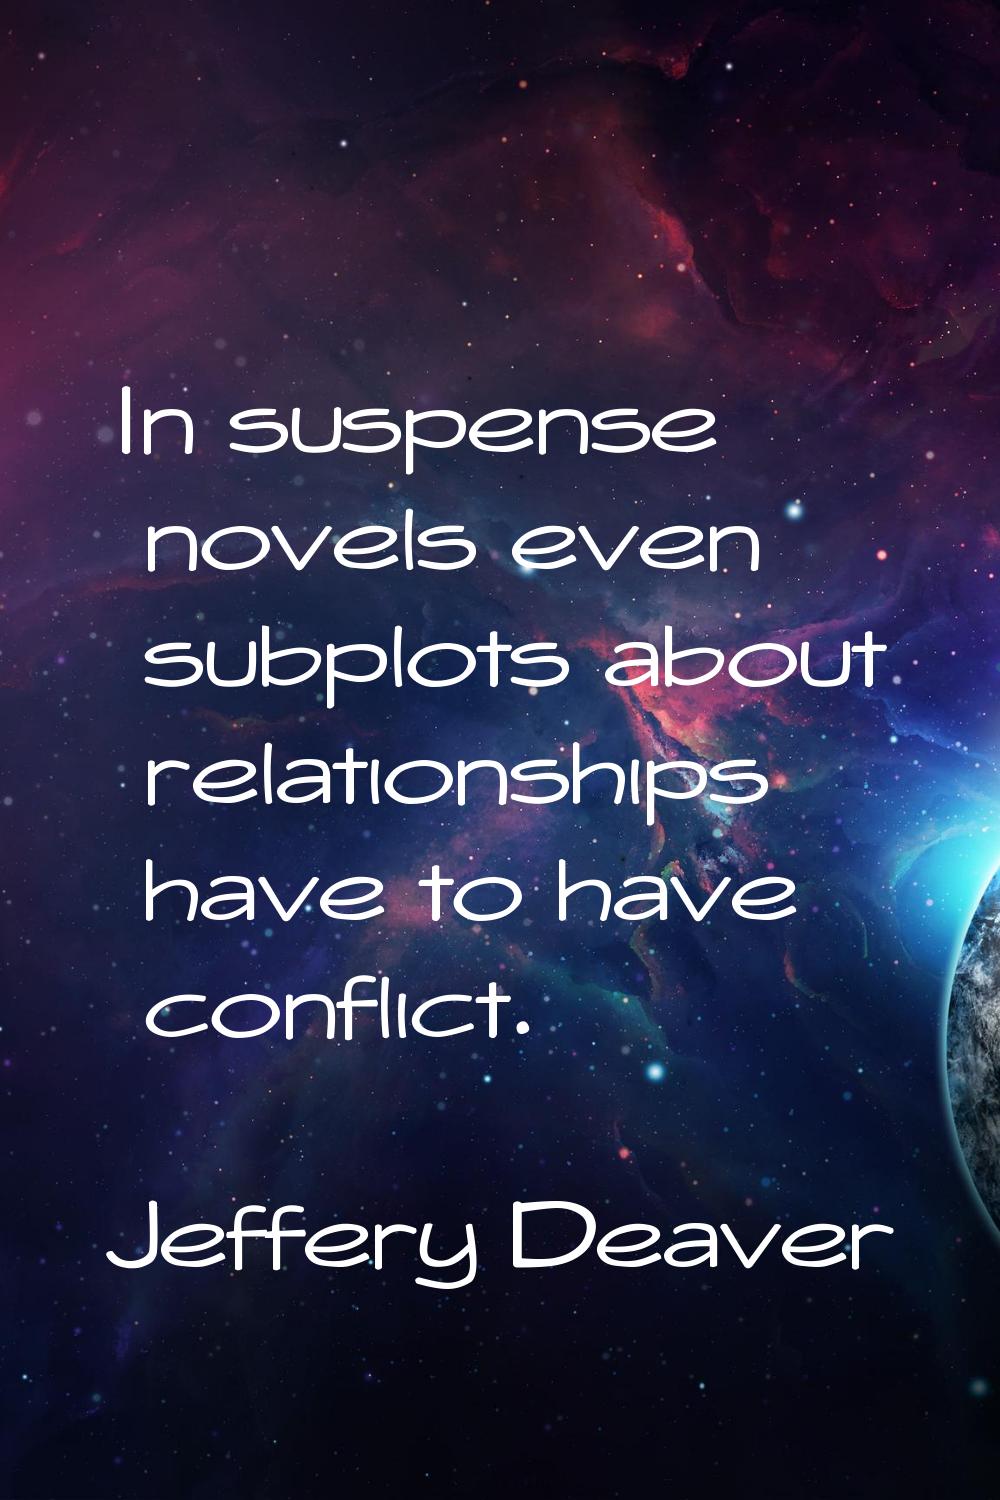 In suspense novels even subplots about relationships have to have conflict.